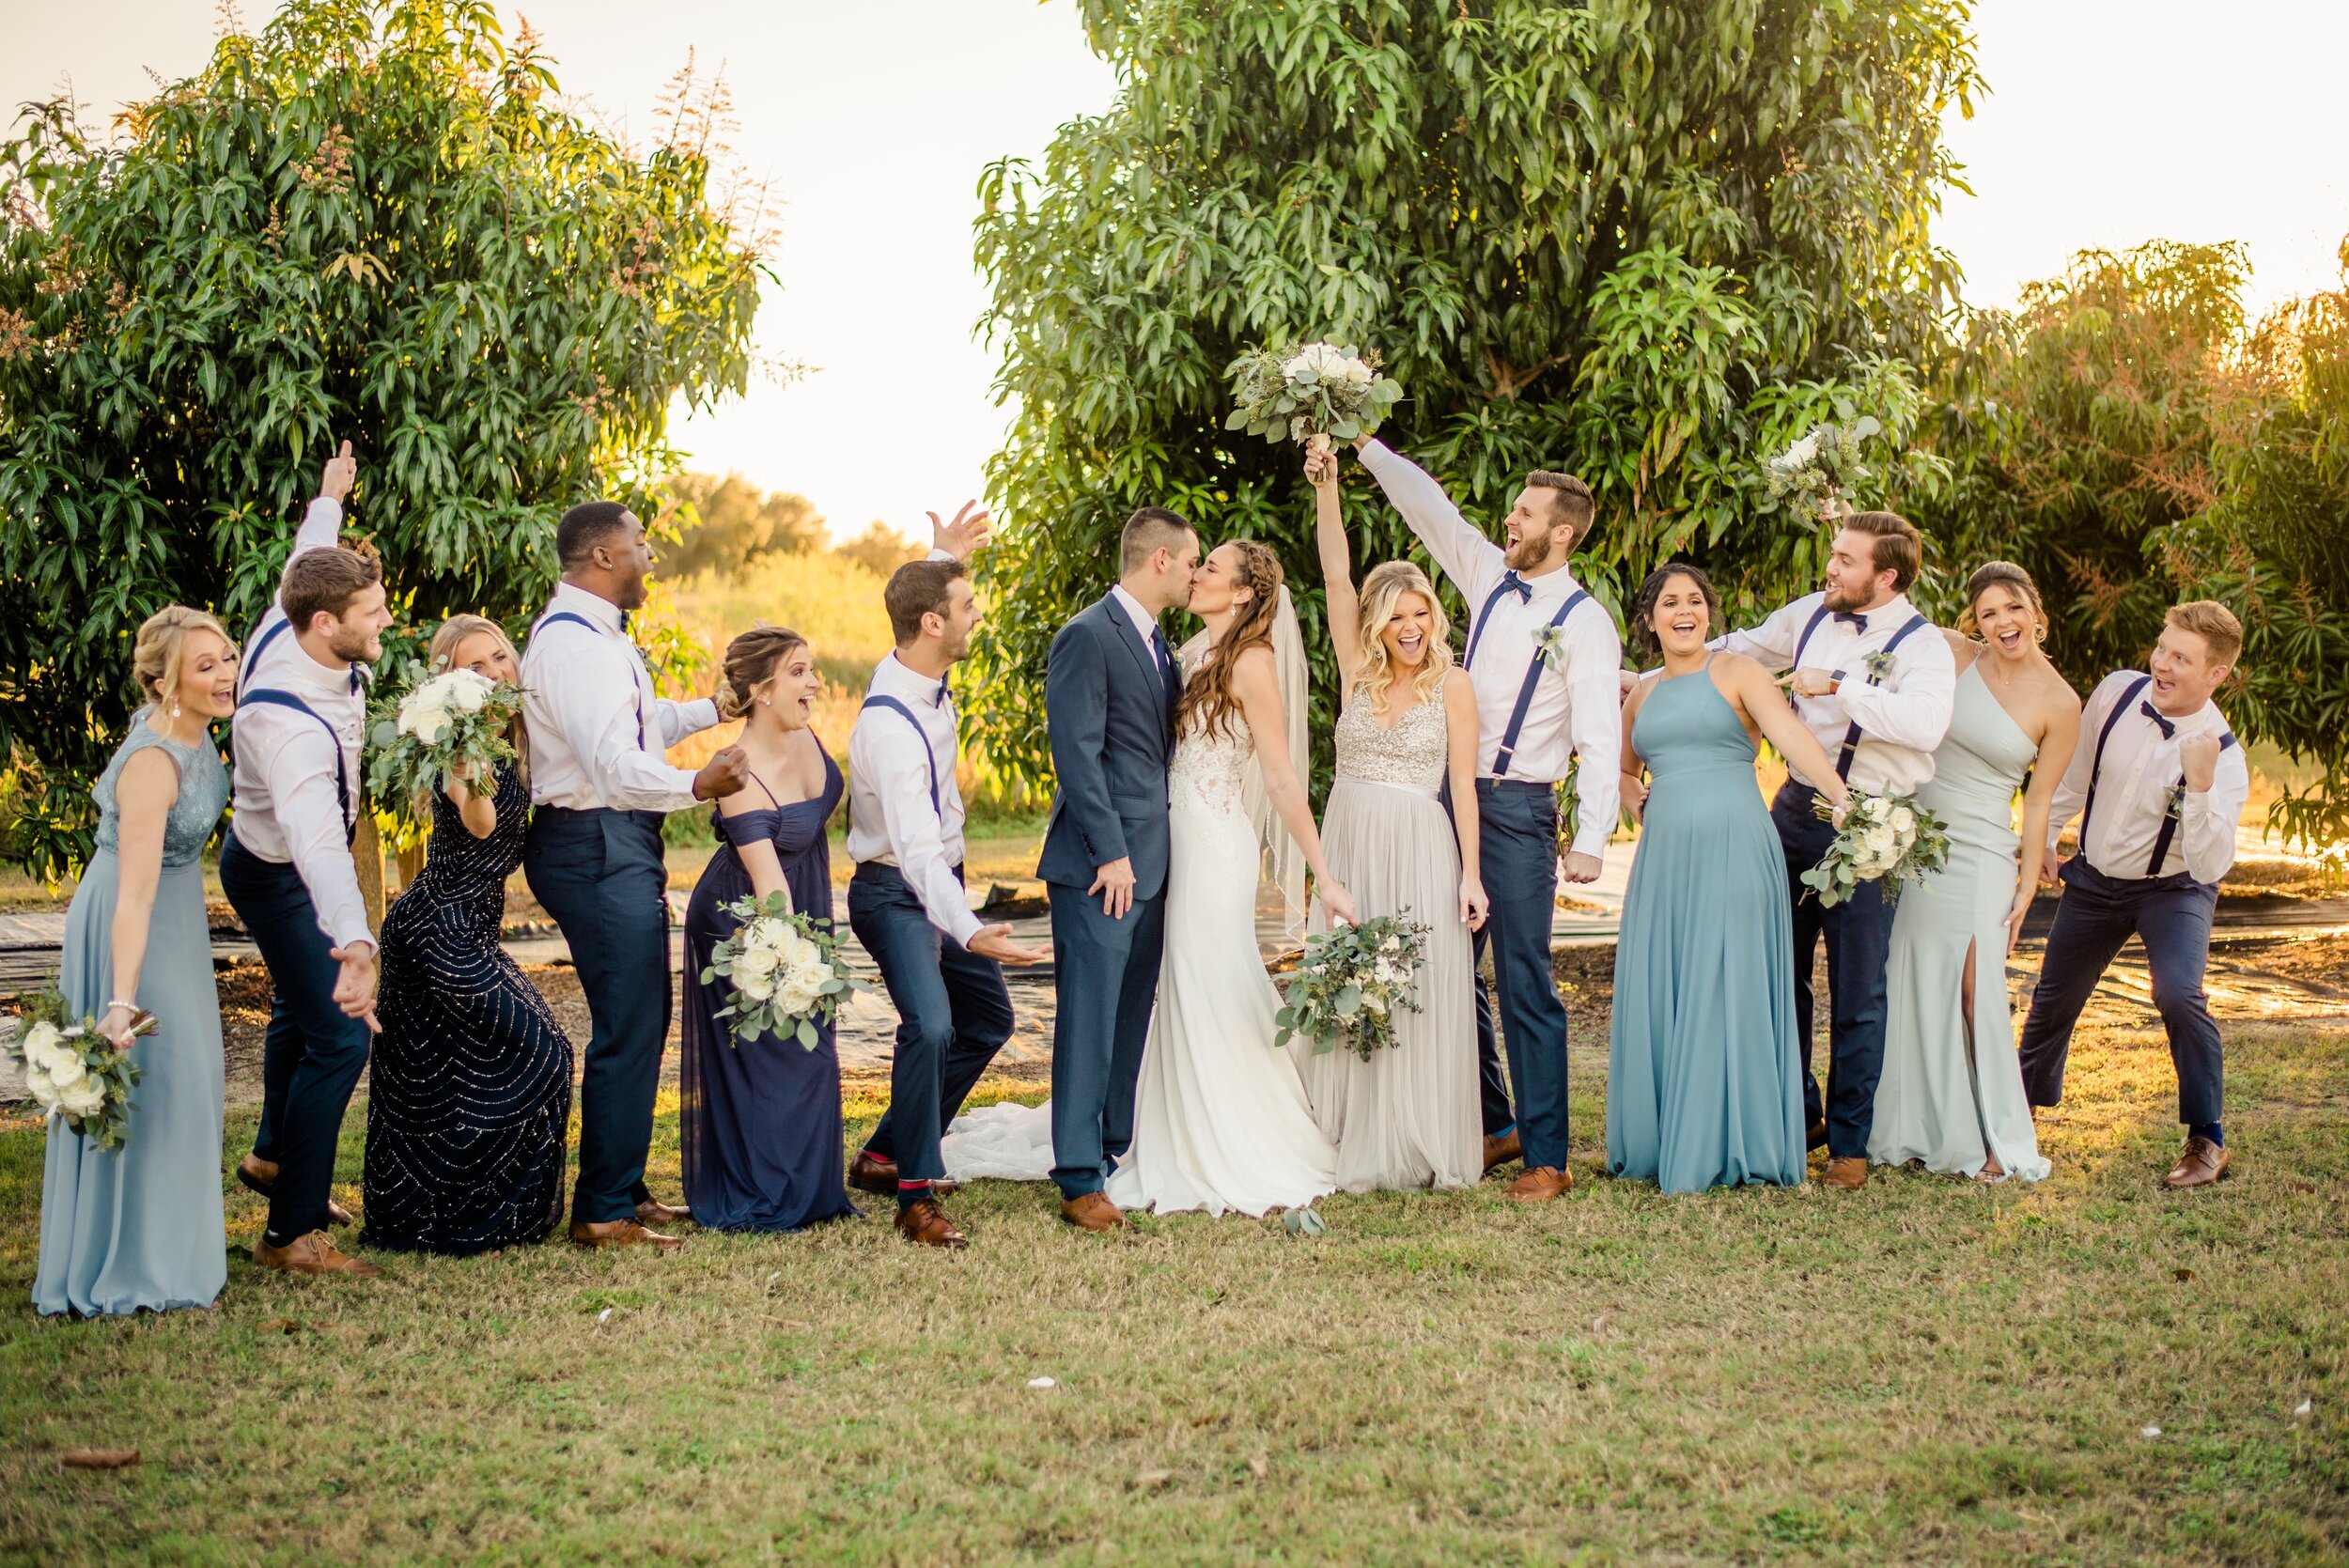 The beautiful bridal party in shades of blue with green and white flowers